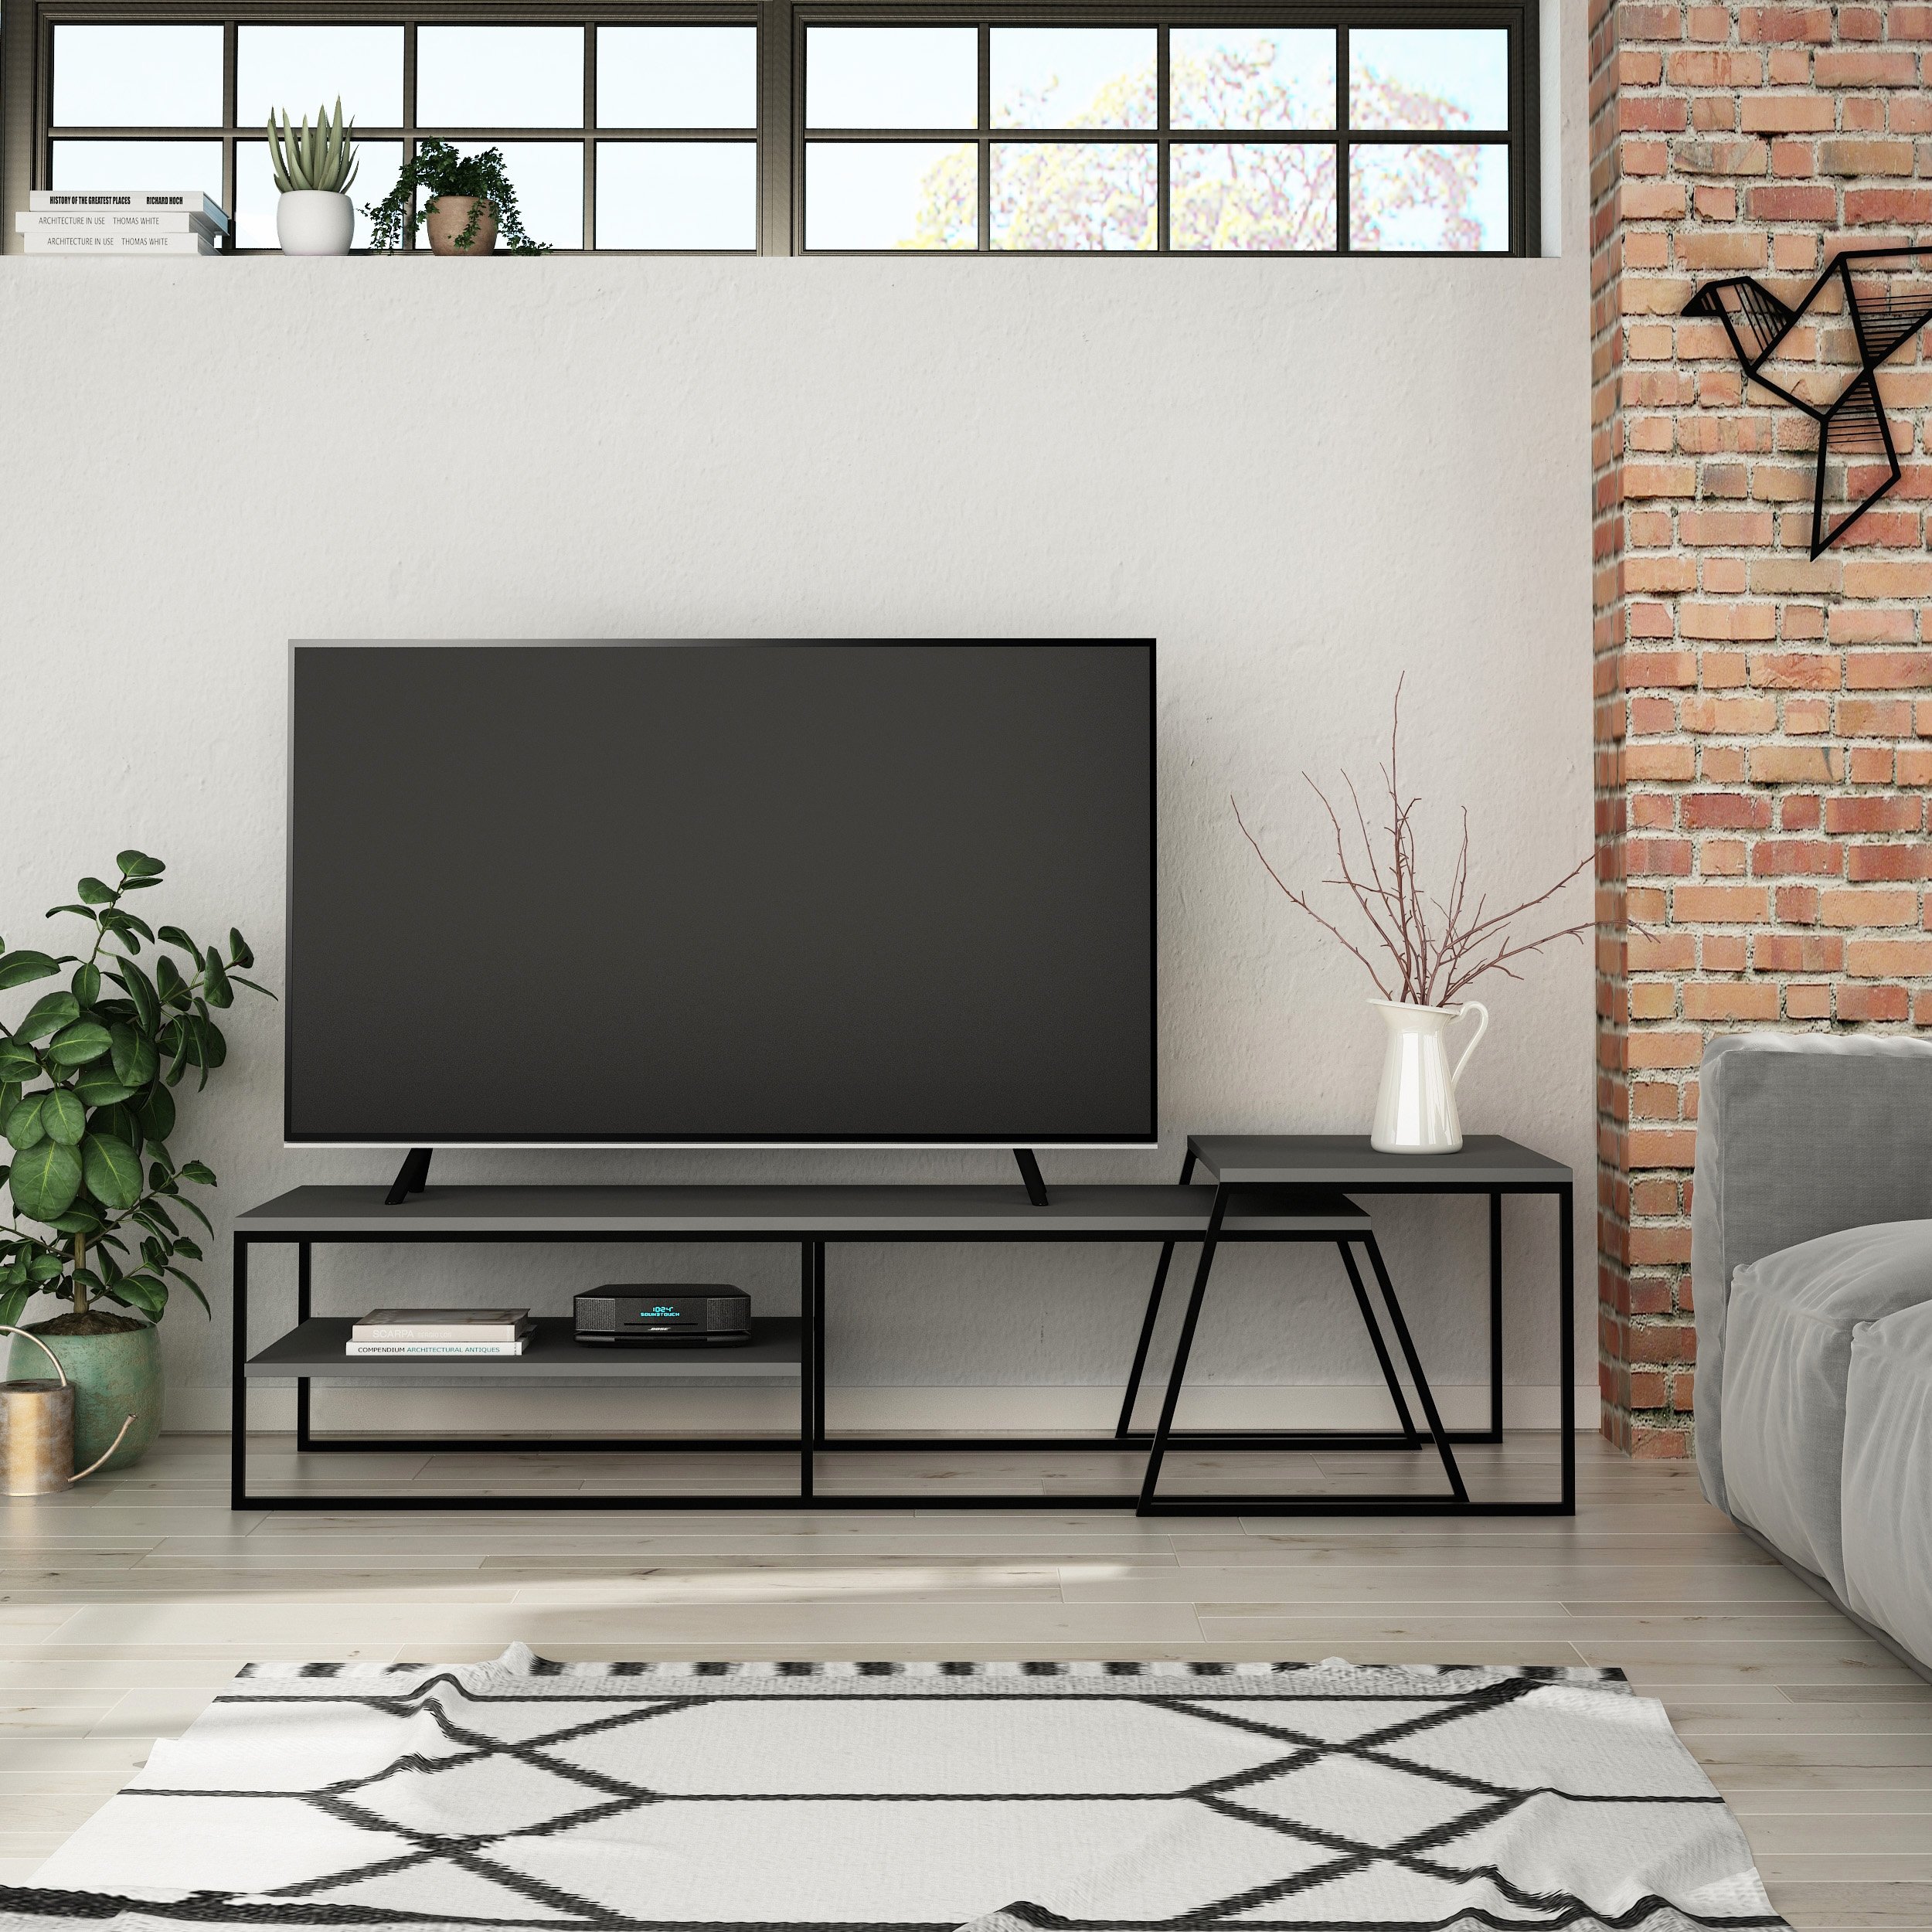 PAL TV STAND - ANTHRACITE - M.TV.16580.3